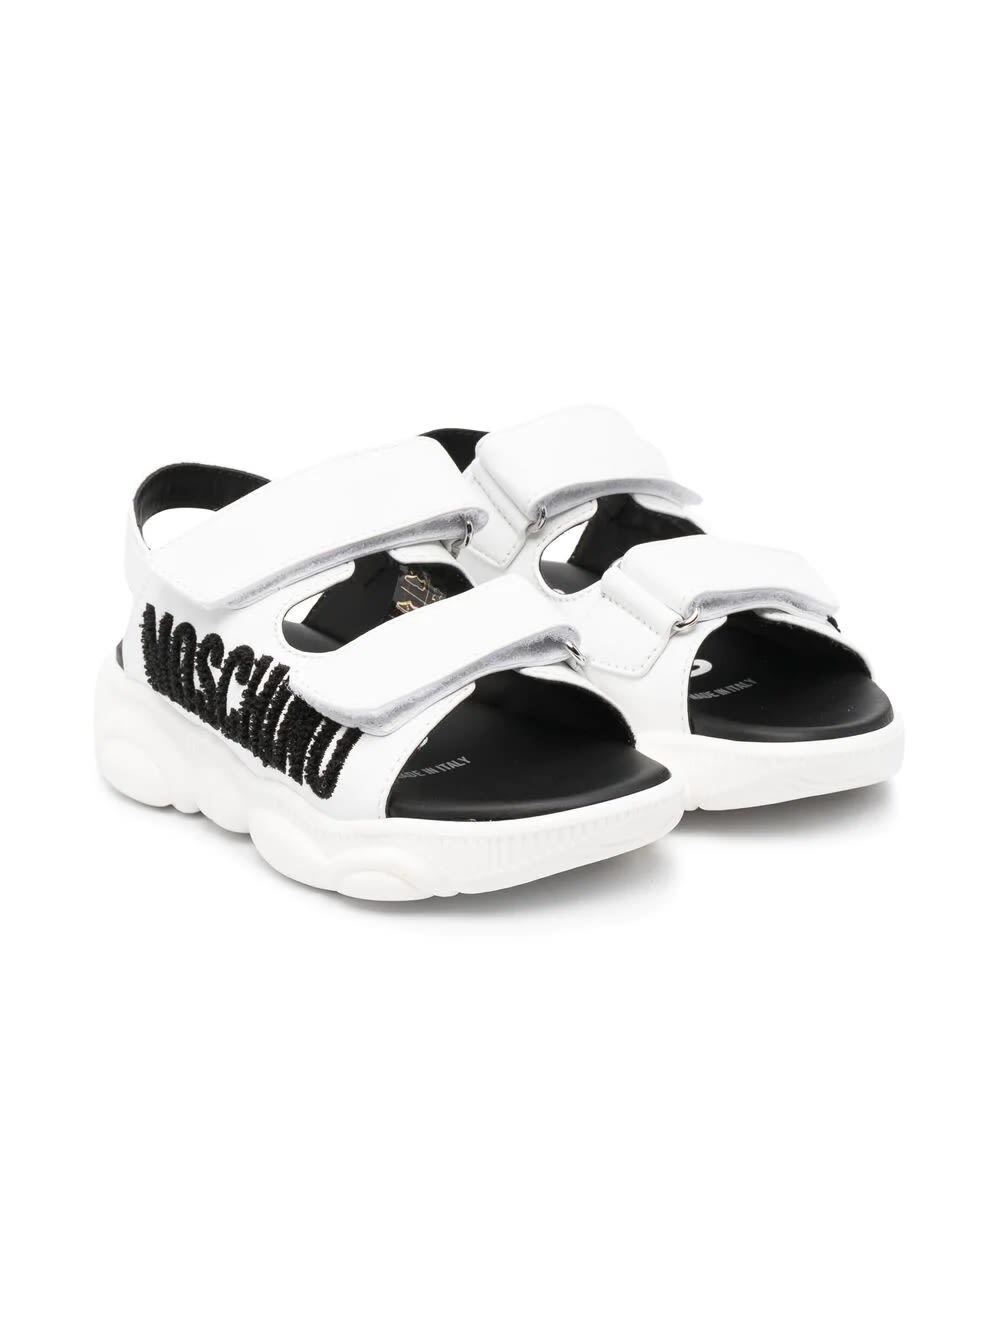 Moschino Sandals With Writing